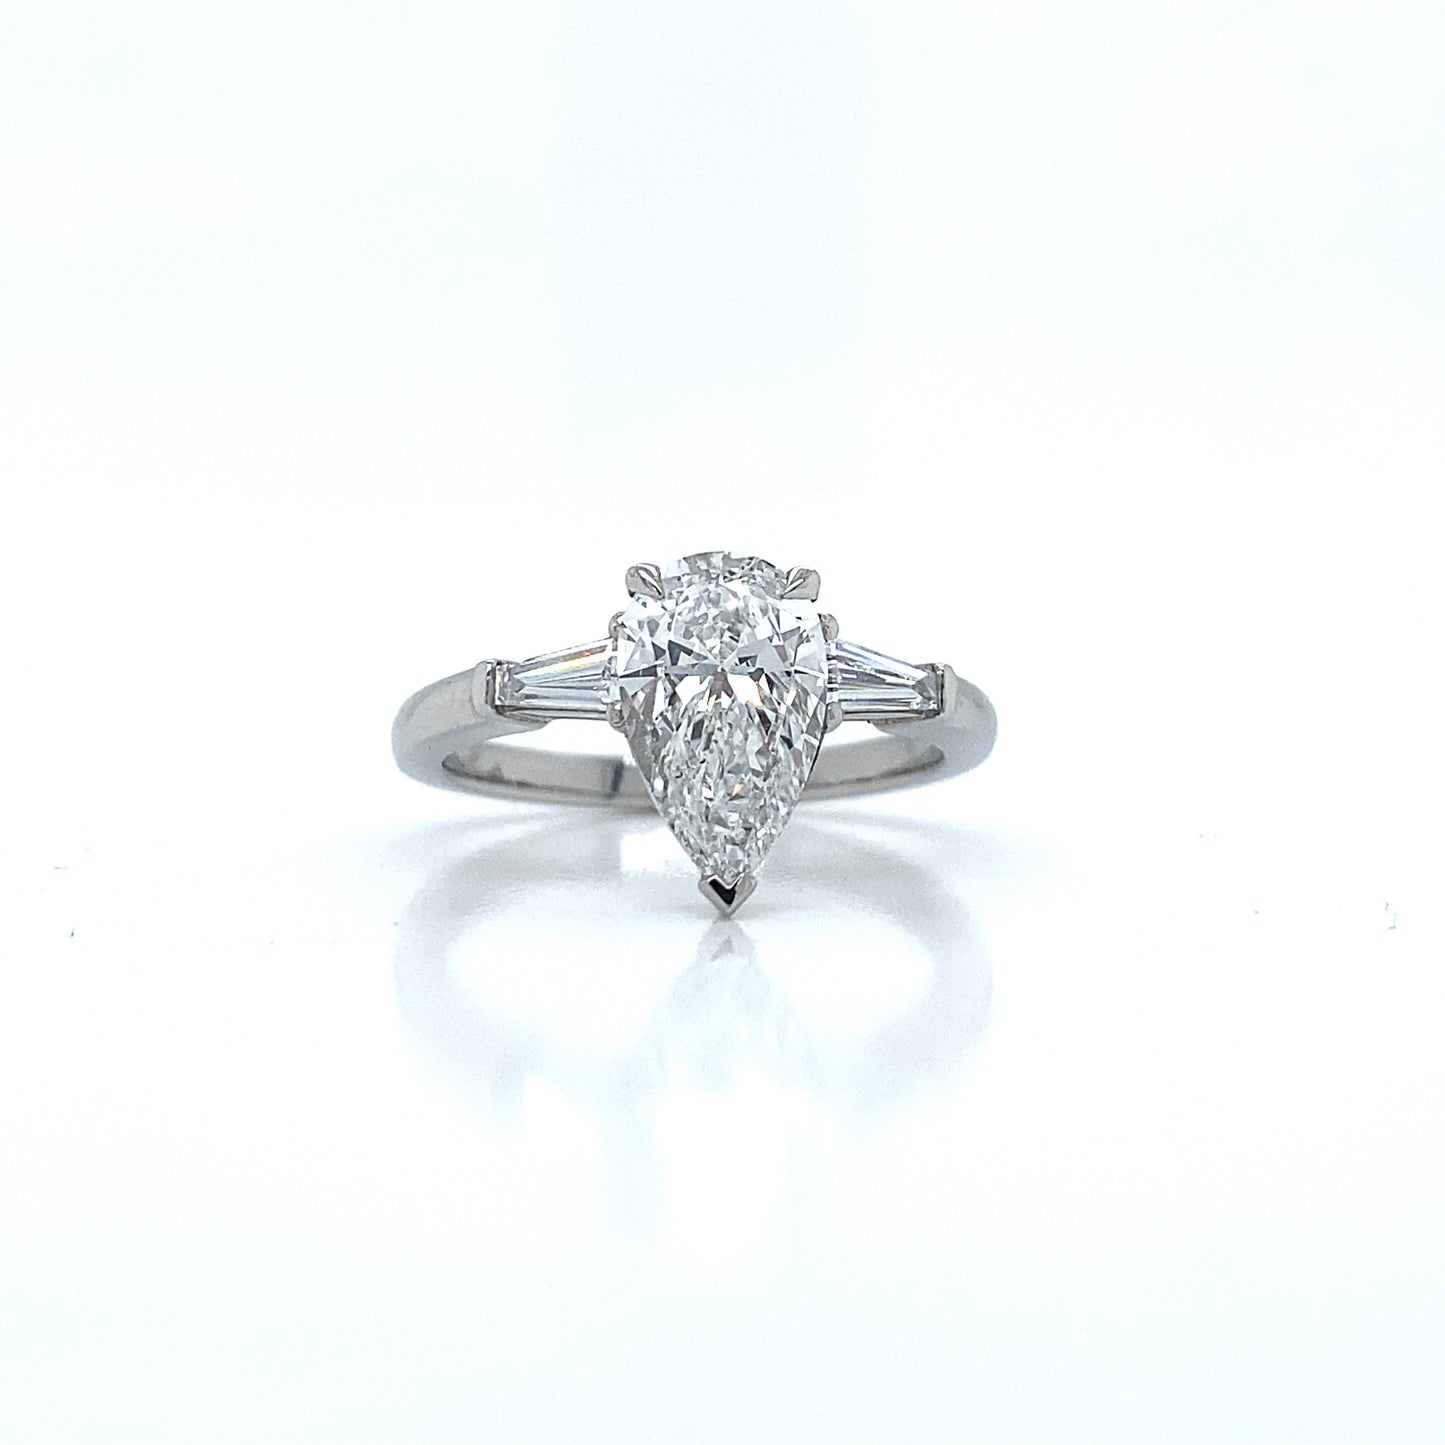 Hand-made pear shape & tapered baguette cut platinum engagement ring